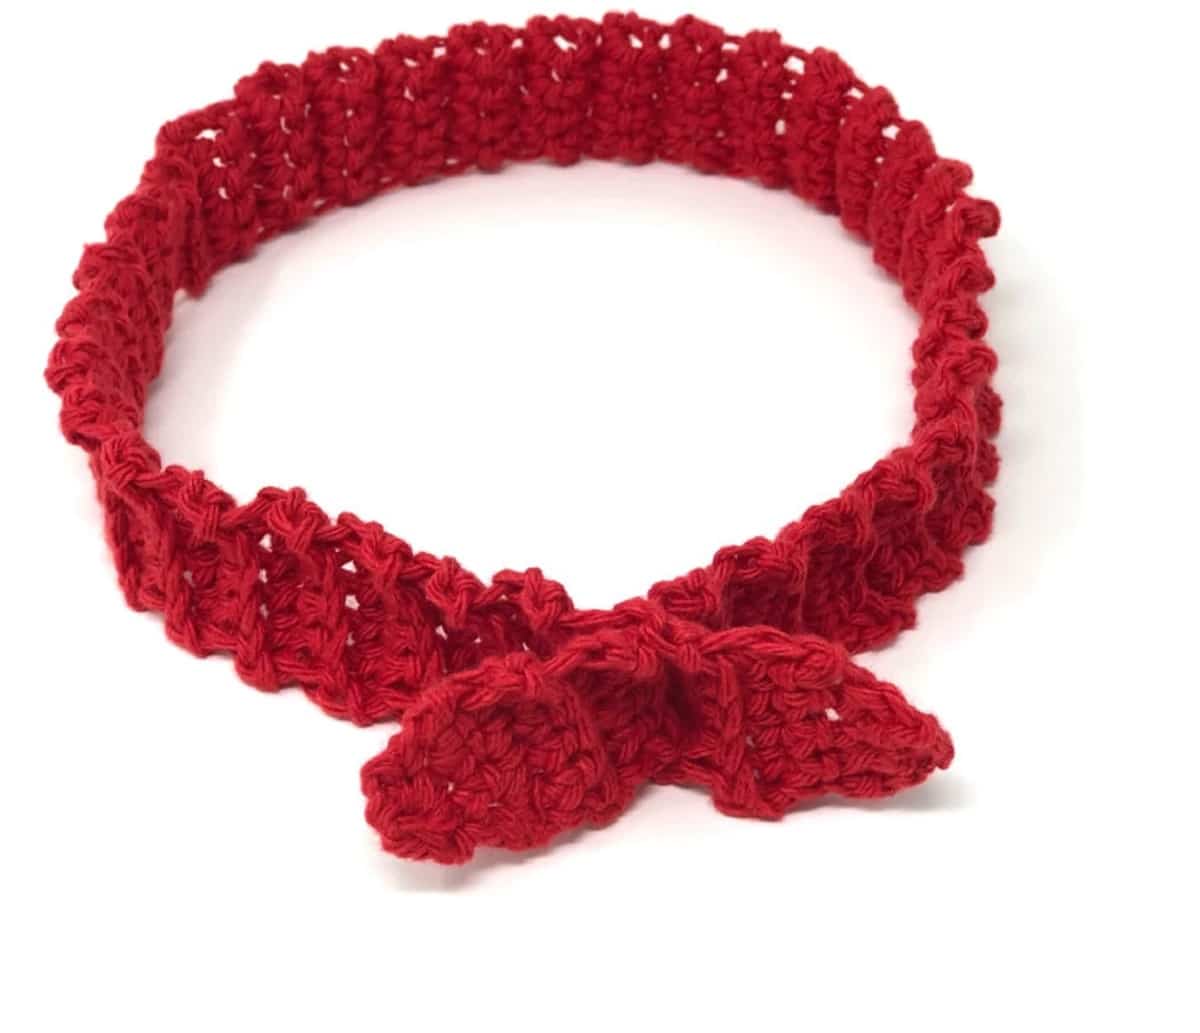 Slim red crochet headband with a small bow in the center on a plain white background.